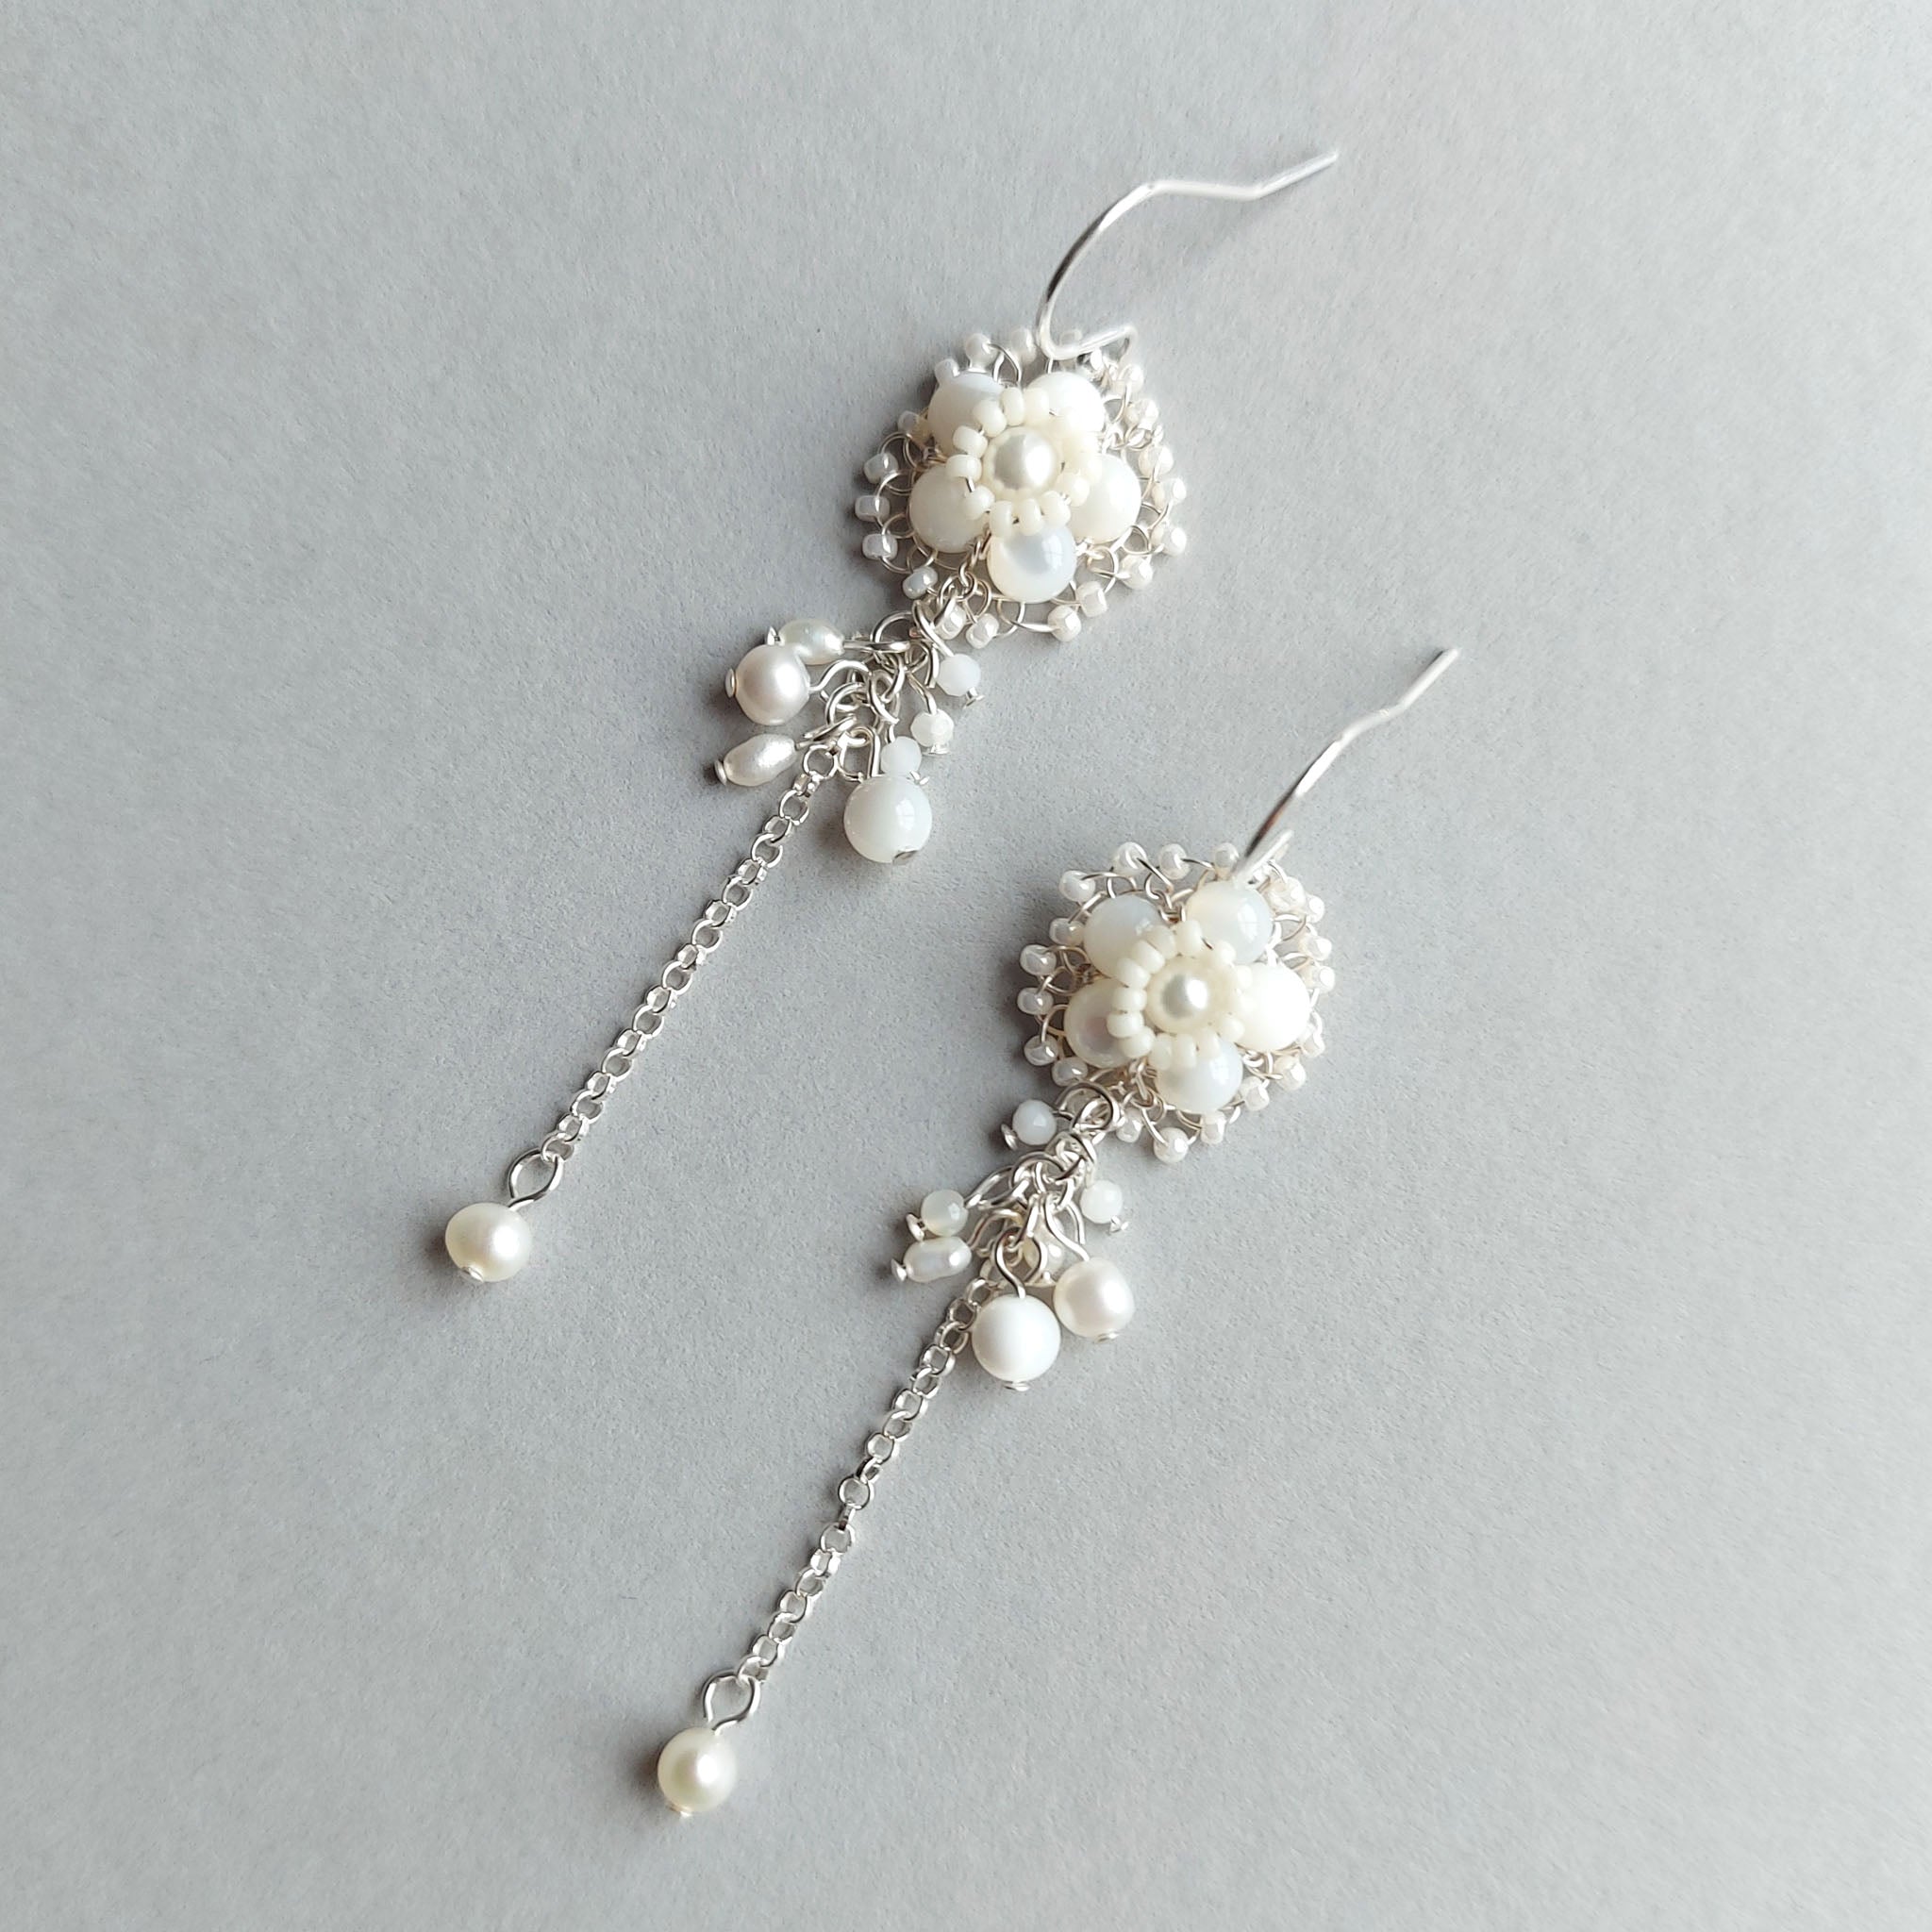 Mother of pearl, freshwater pearl and silver wedding earrings by Judith Brown Bridal